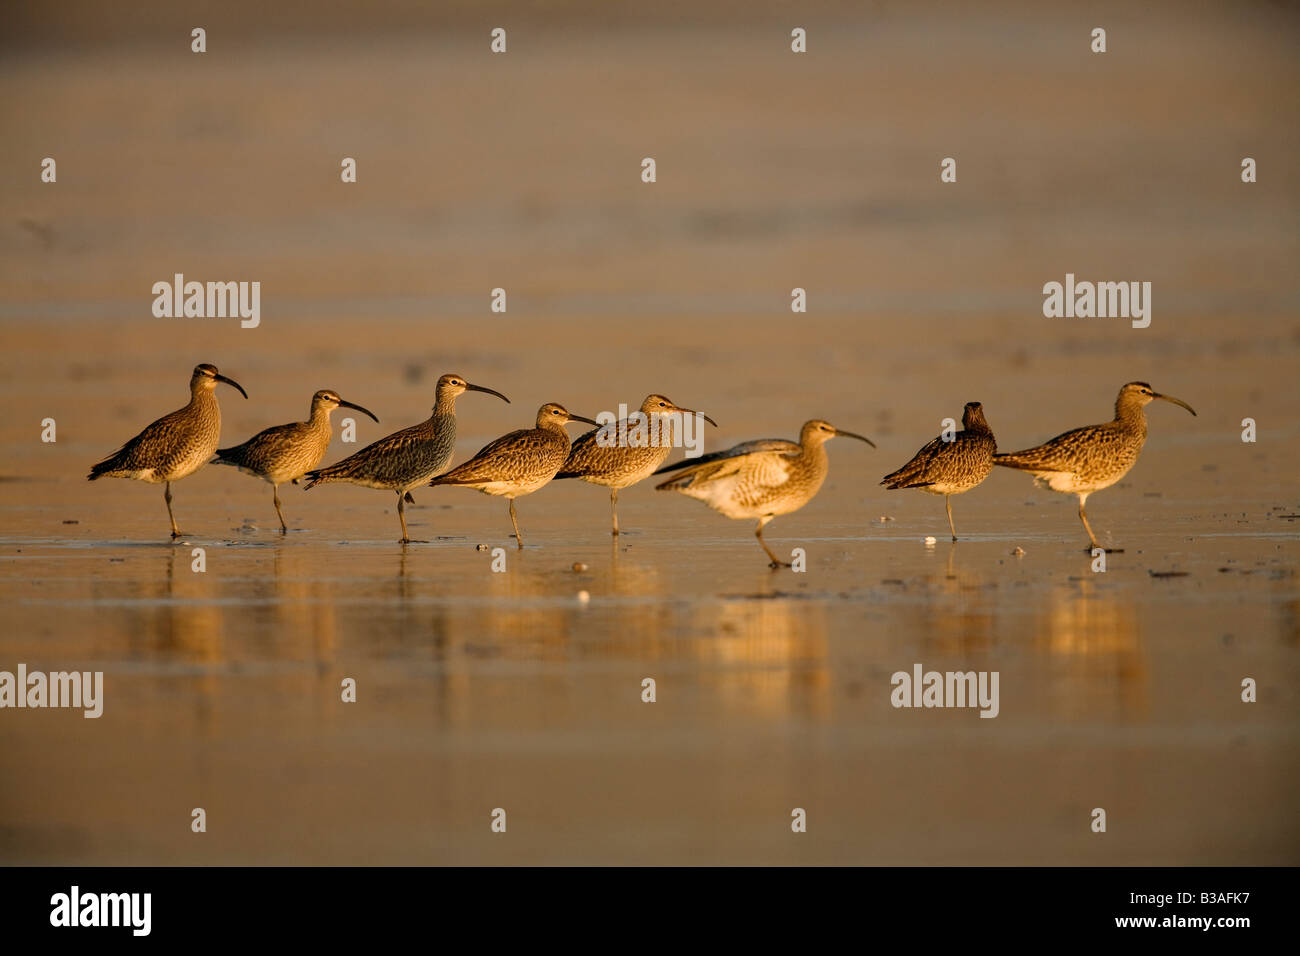 Whimbrel - Numenius phaeopus - Whimbrels  roosting on sandy beach in warm light Stock Photo